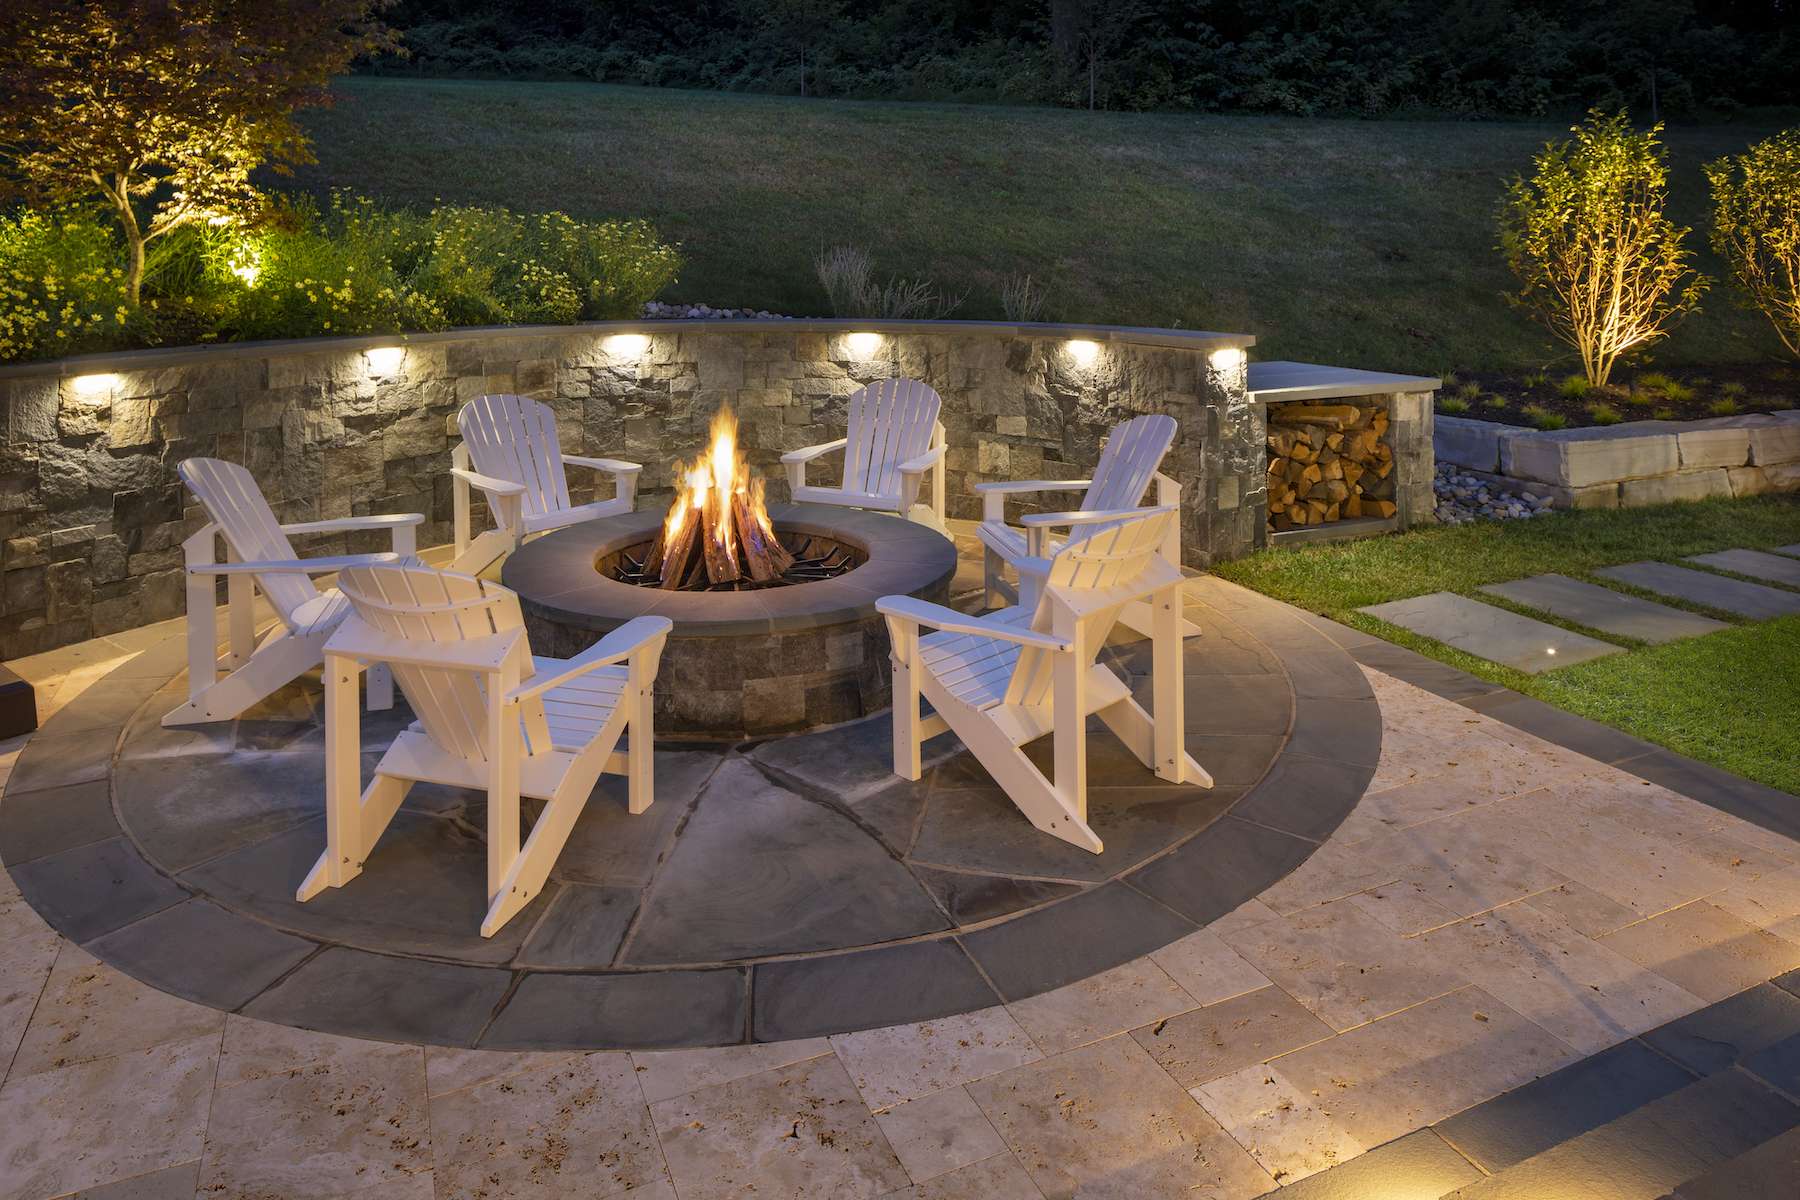 3 Things to Consider When Adding a Fire Pit to Your Landscape